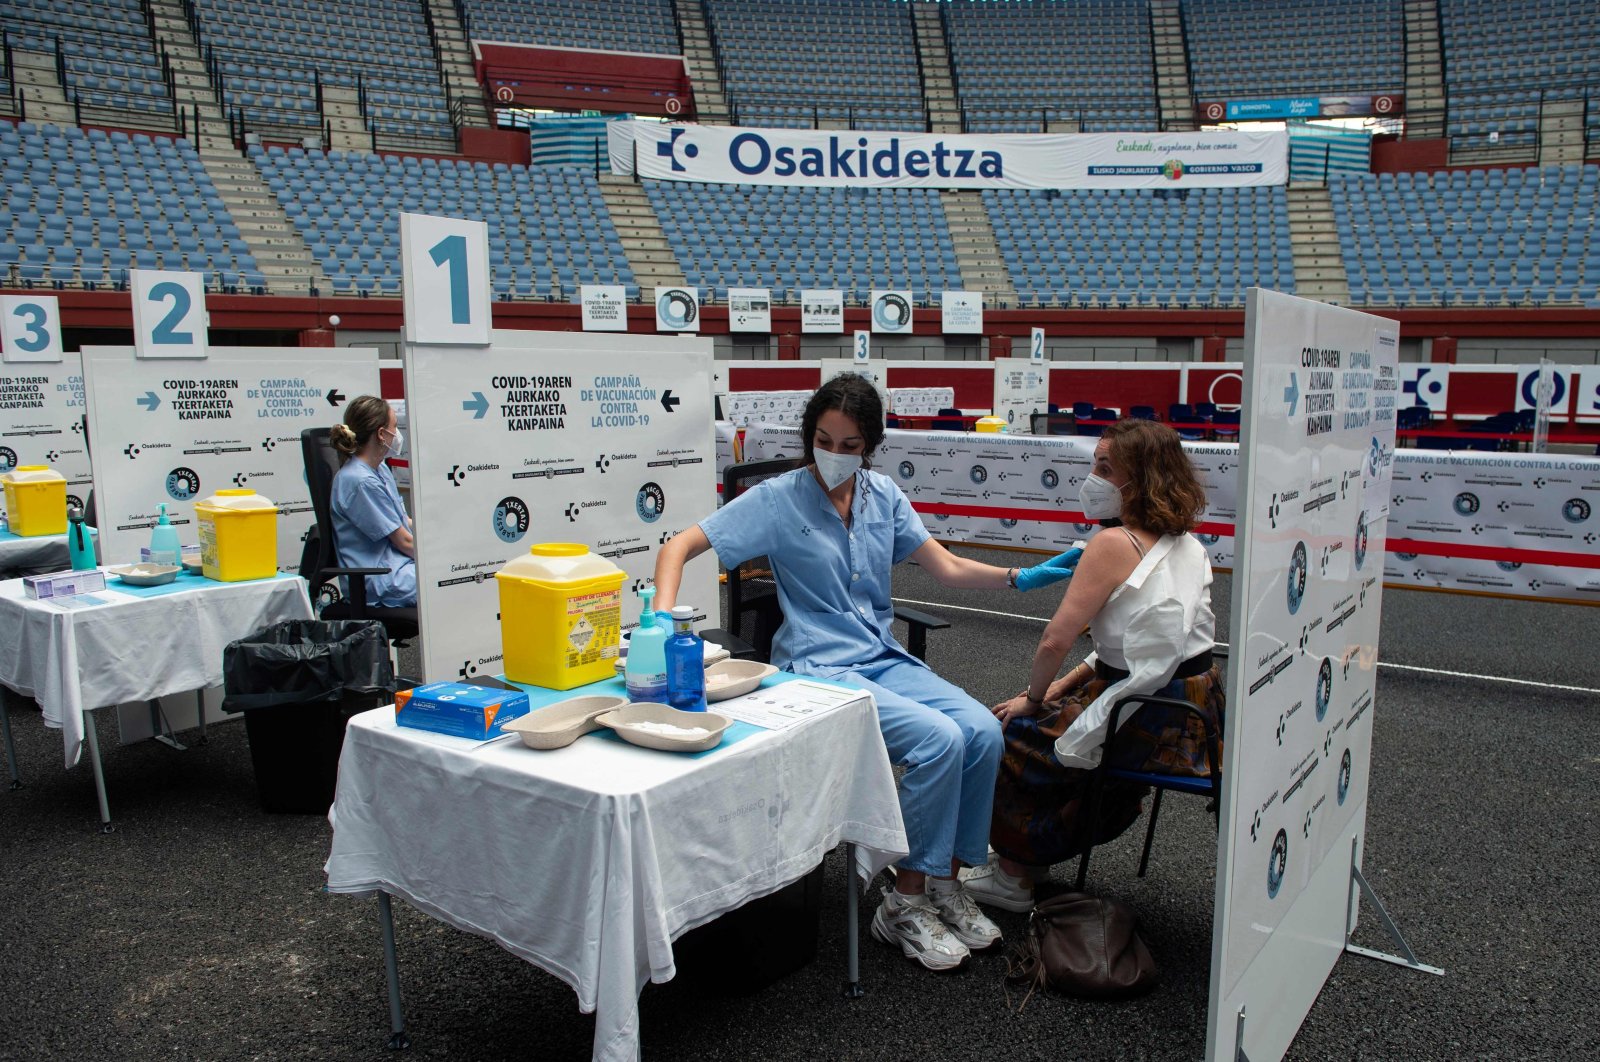 Health workers vaccinate people against COVID-19 at the Donostia Arena former bullring in San Sebastian, Spain, May 31, 2021. (AFP Photo)